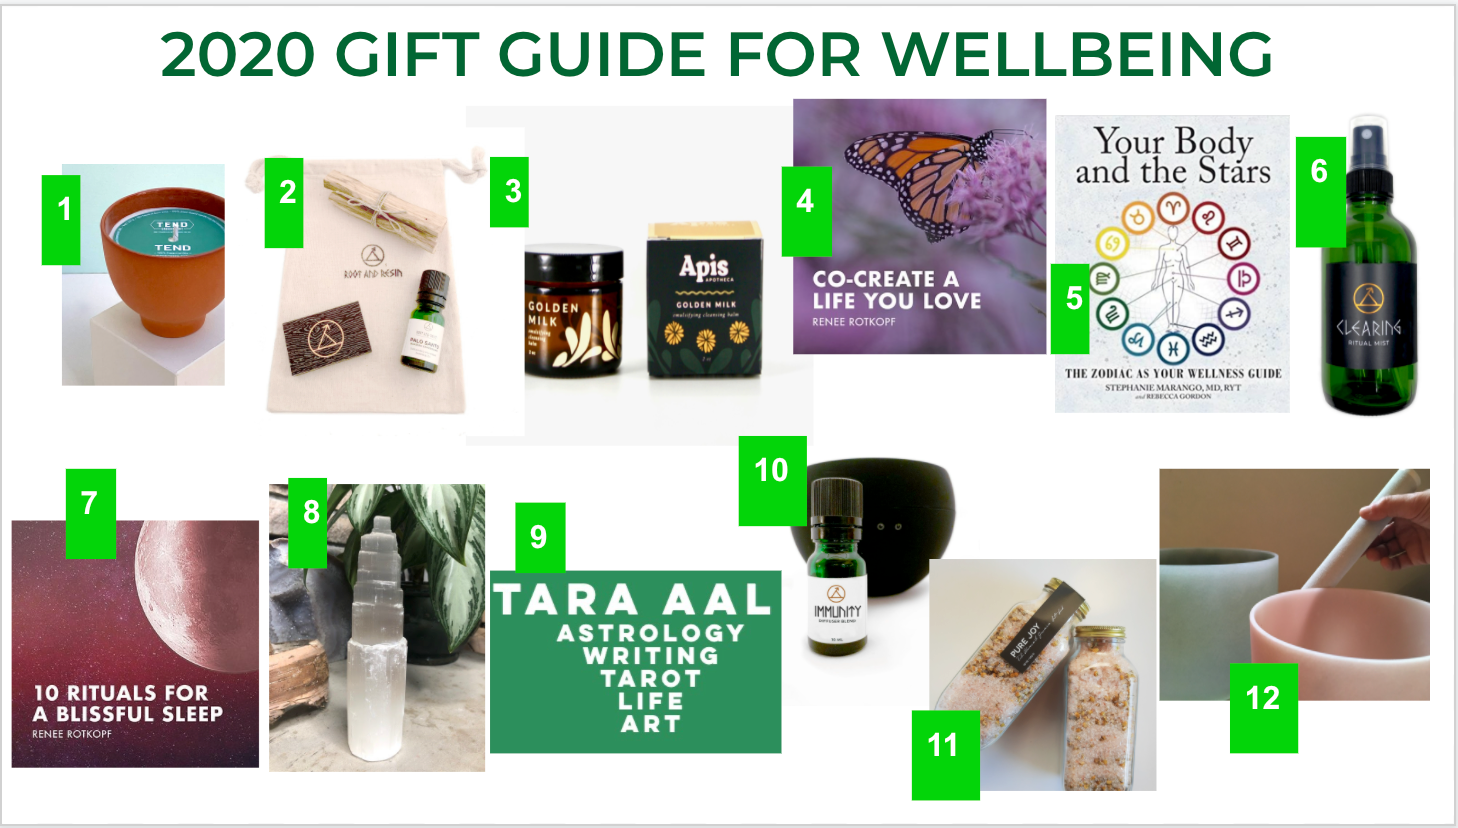 2020 Holiday Gift Guide for Wellbeing in partnership with local artisans